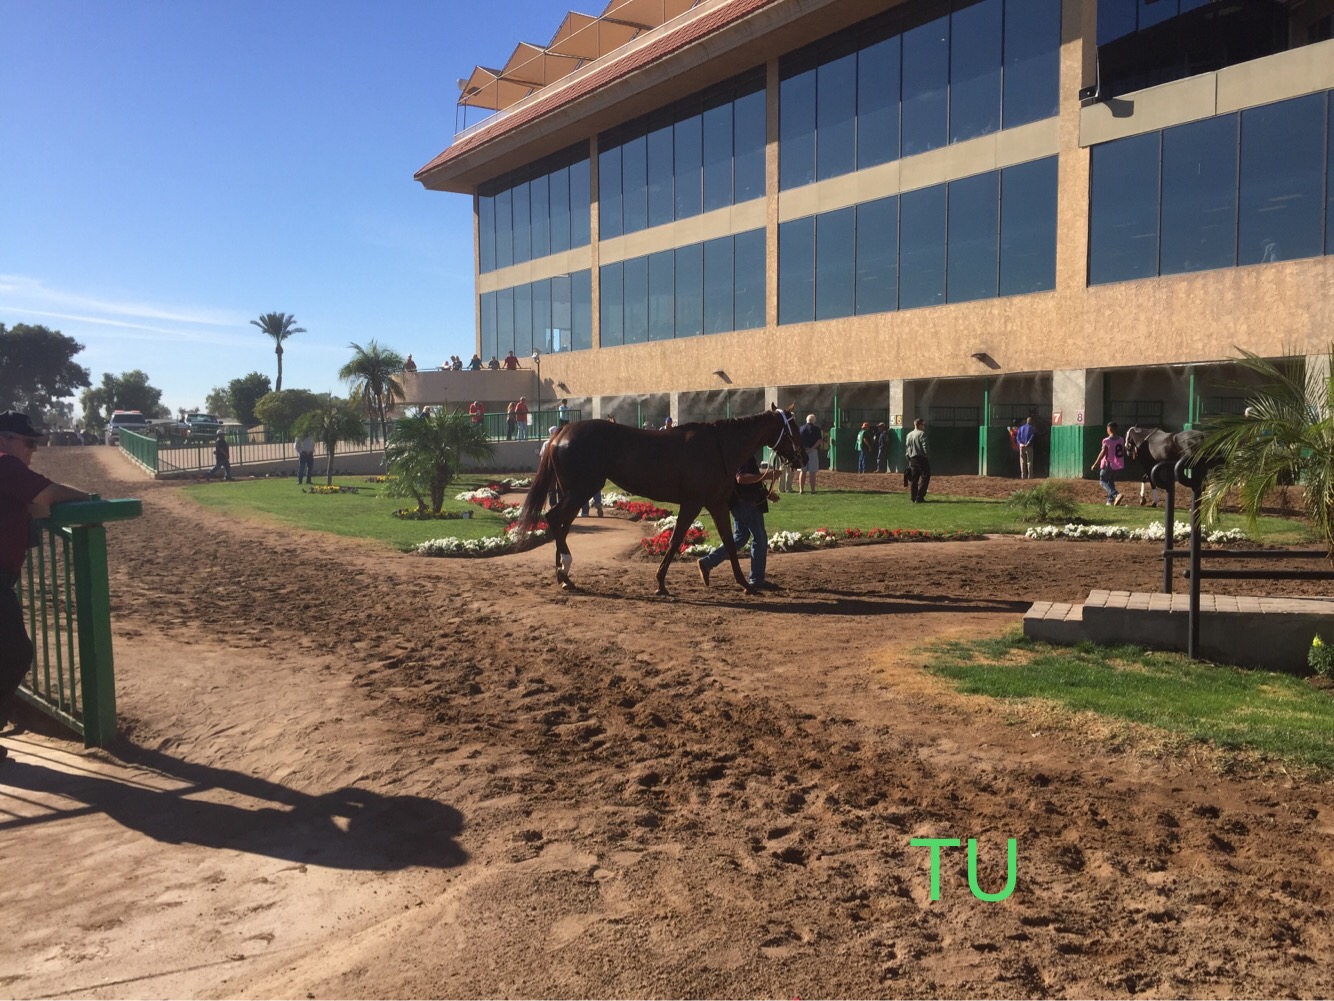 Peppy Miller, one of Eikleberry’s top performers, circles in the Turf Paradise paddock.